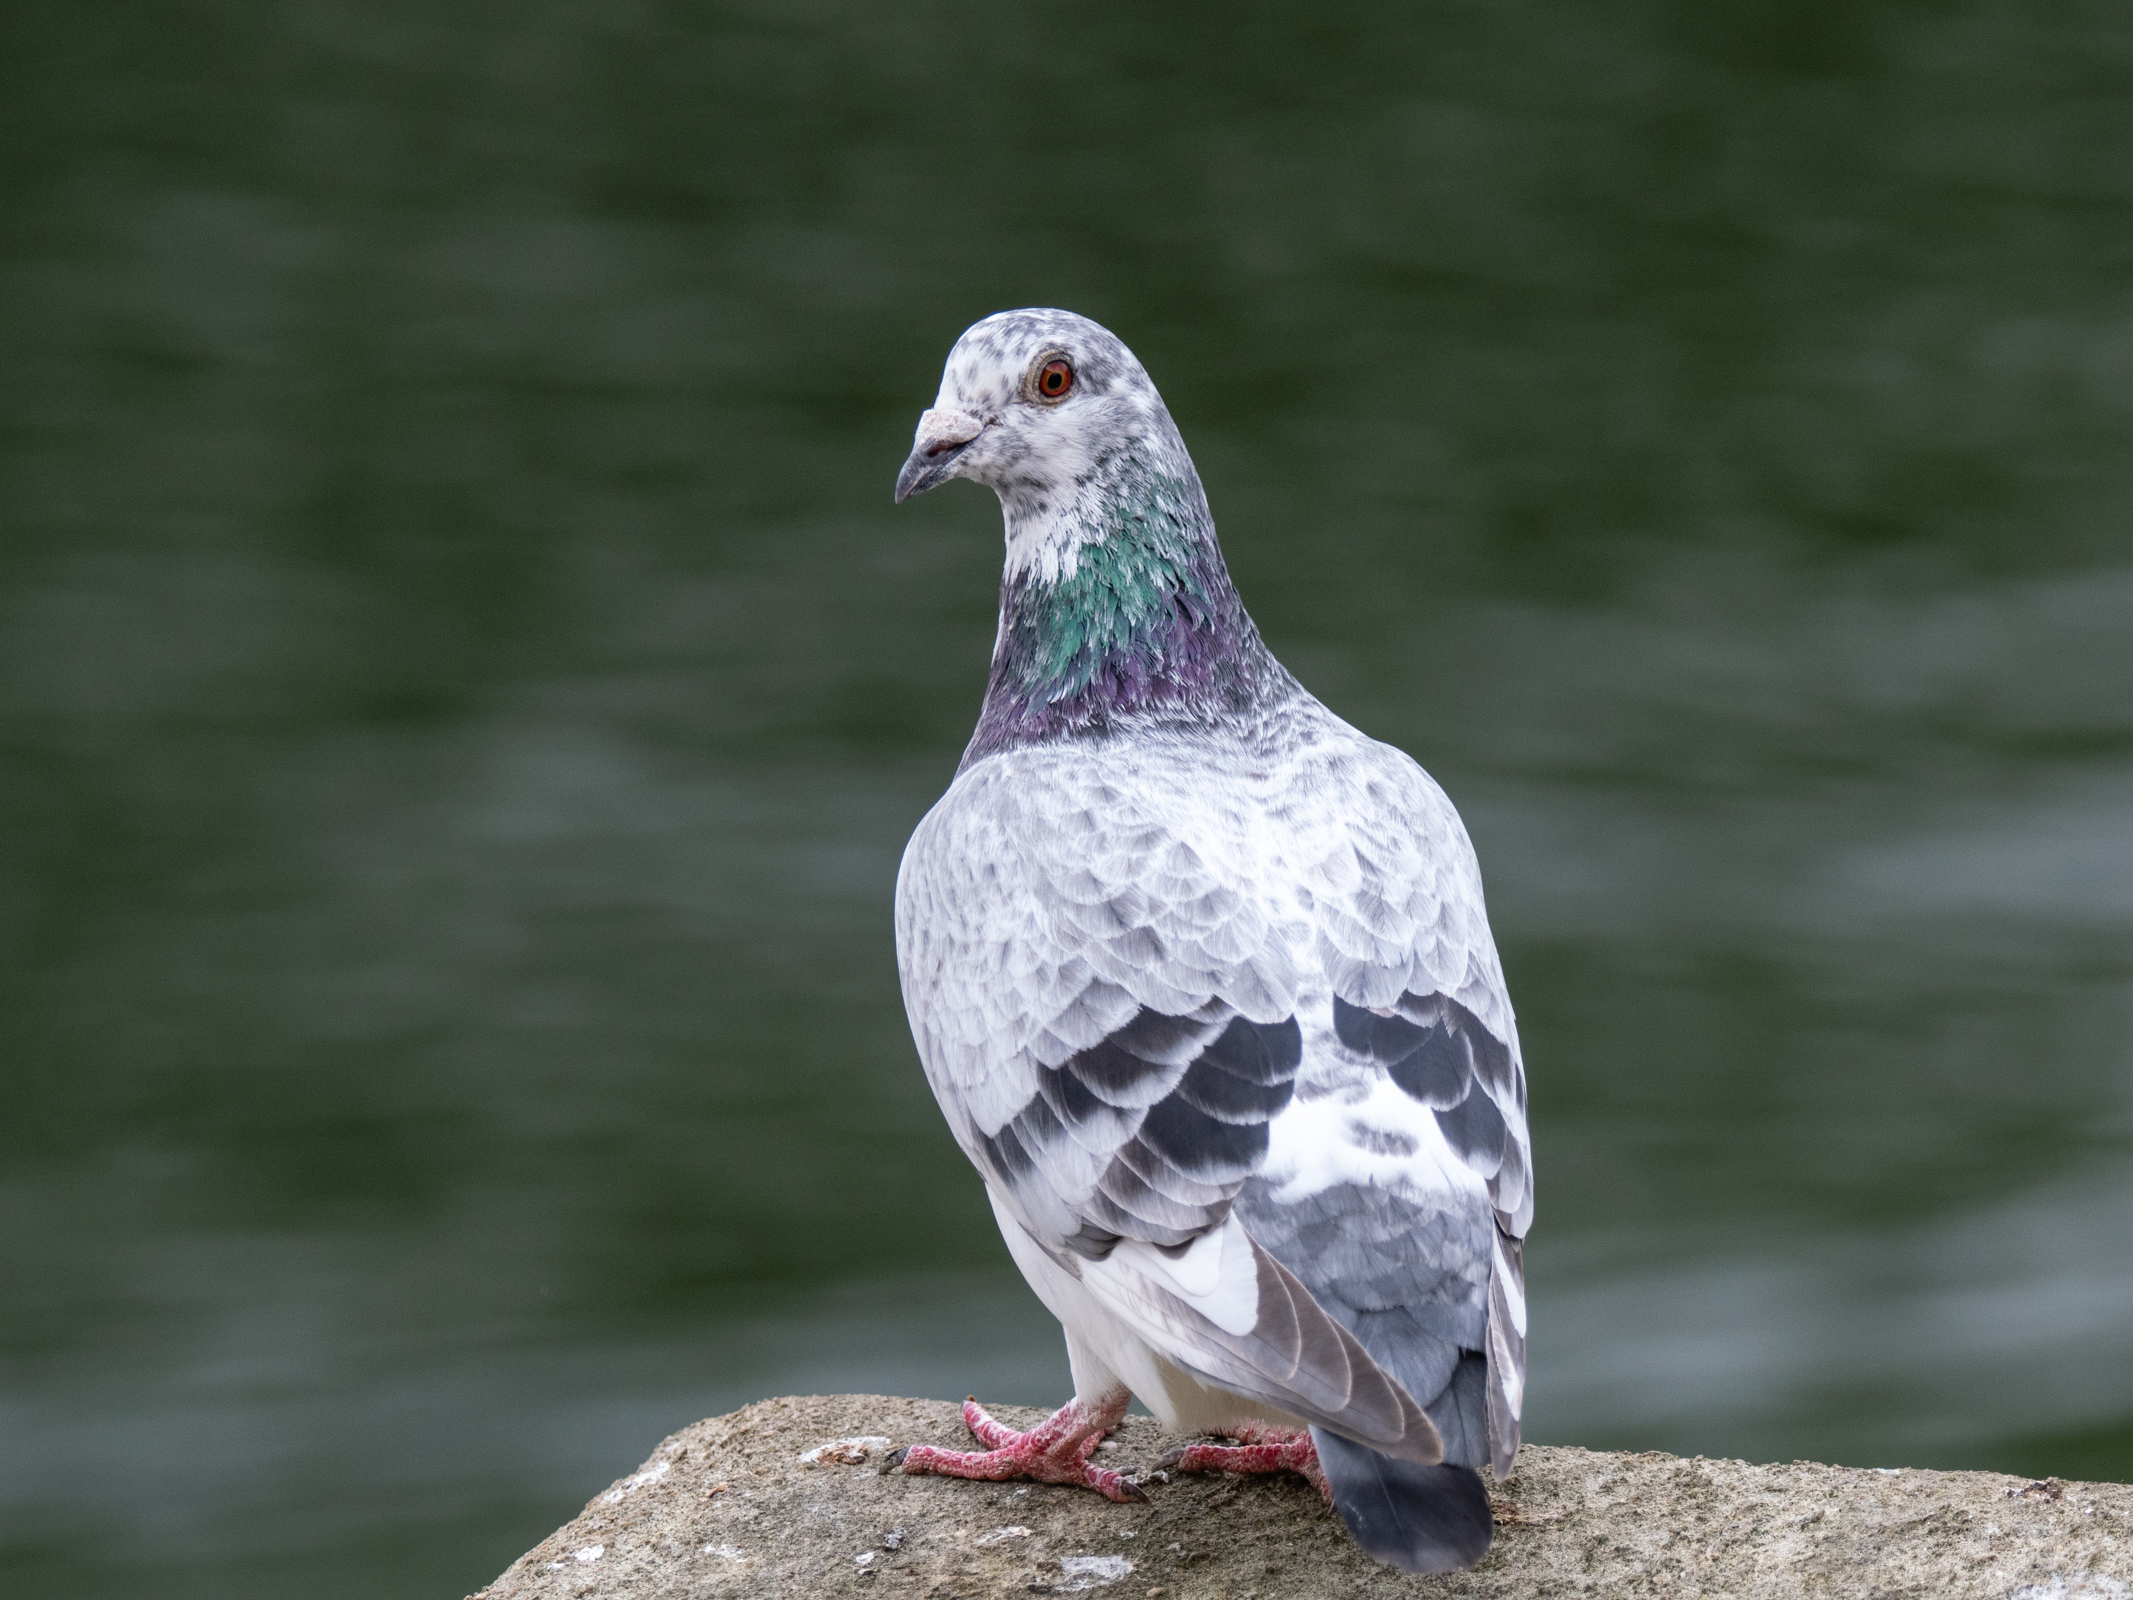 Photo of a pigeon taken with the Olympus OM-1 Mark II